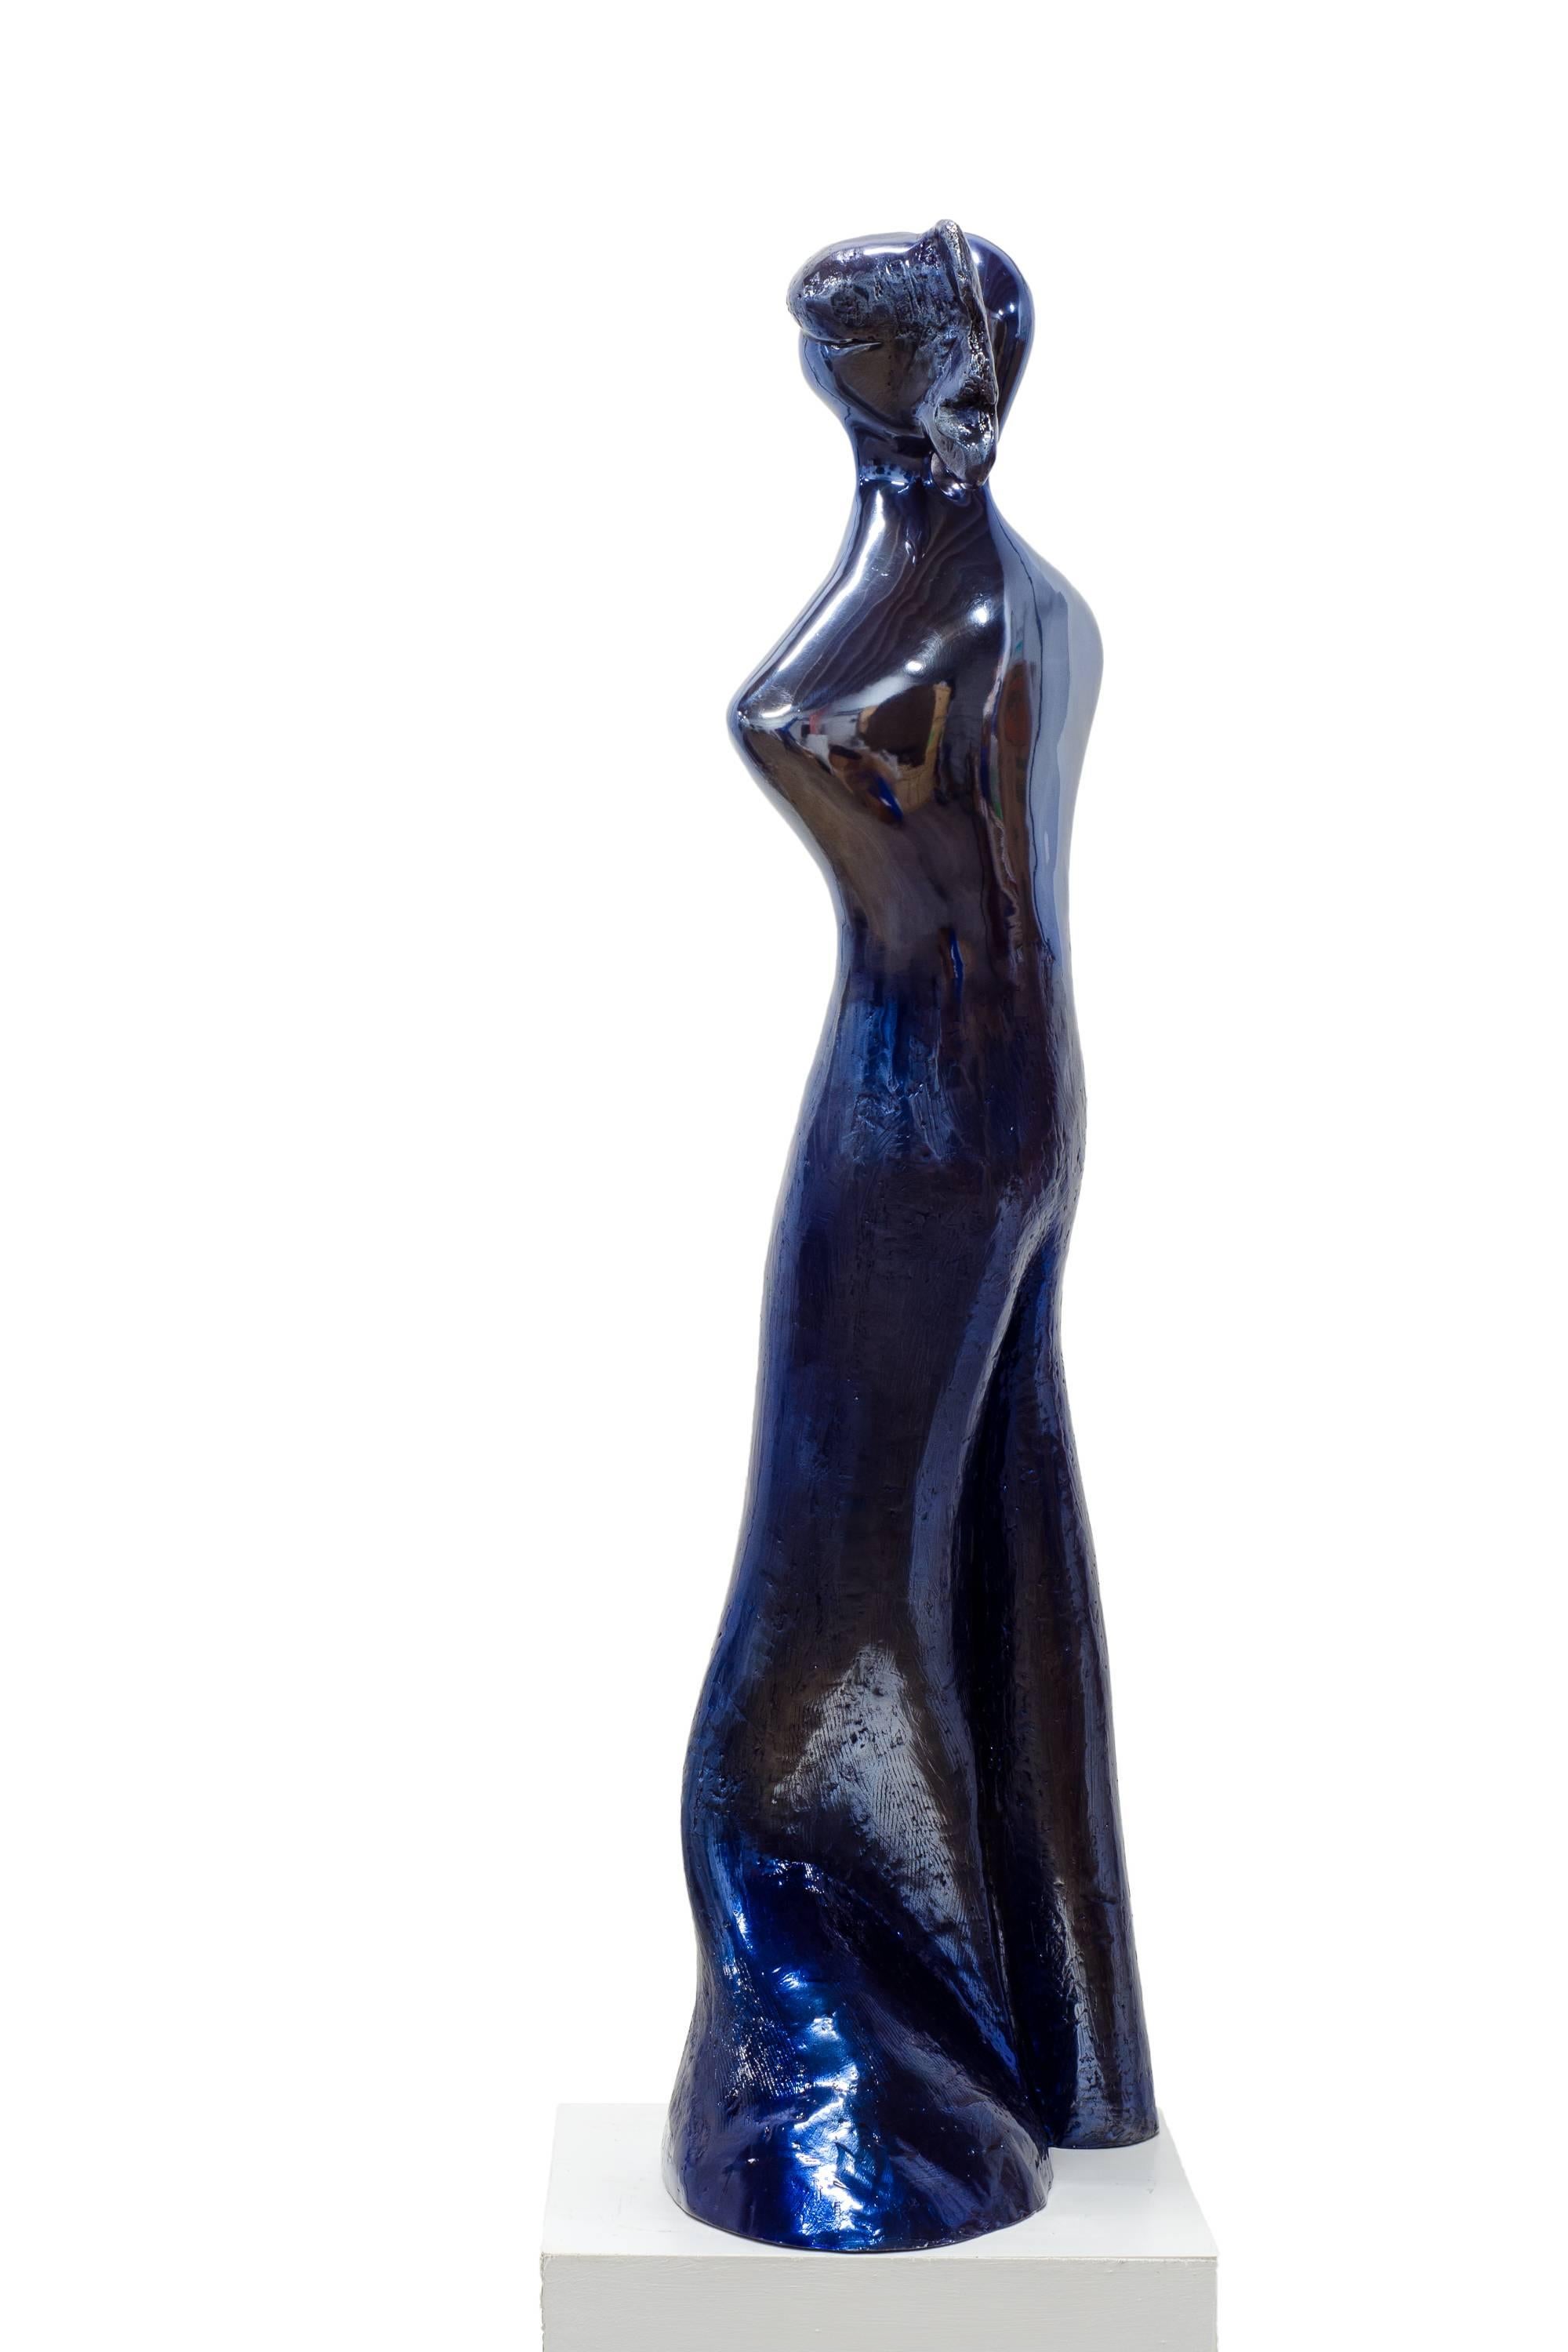 Soulmates #1 (in Blue). When In love, their souls and bodies fuse into just one - Gold Abstract Sculpture by Beatriz Gerenstein